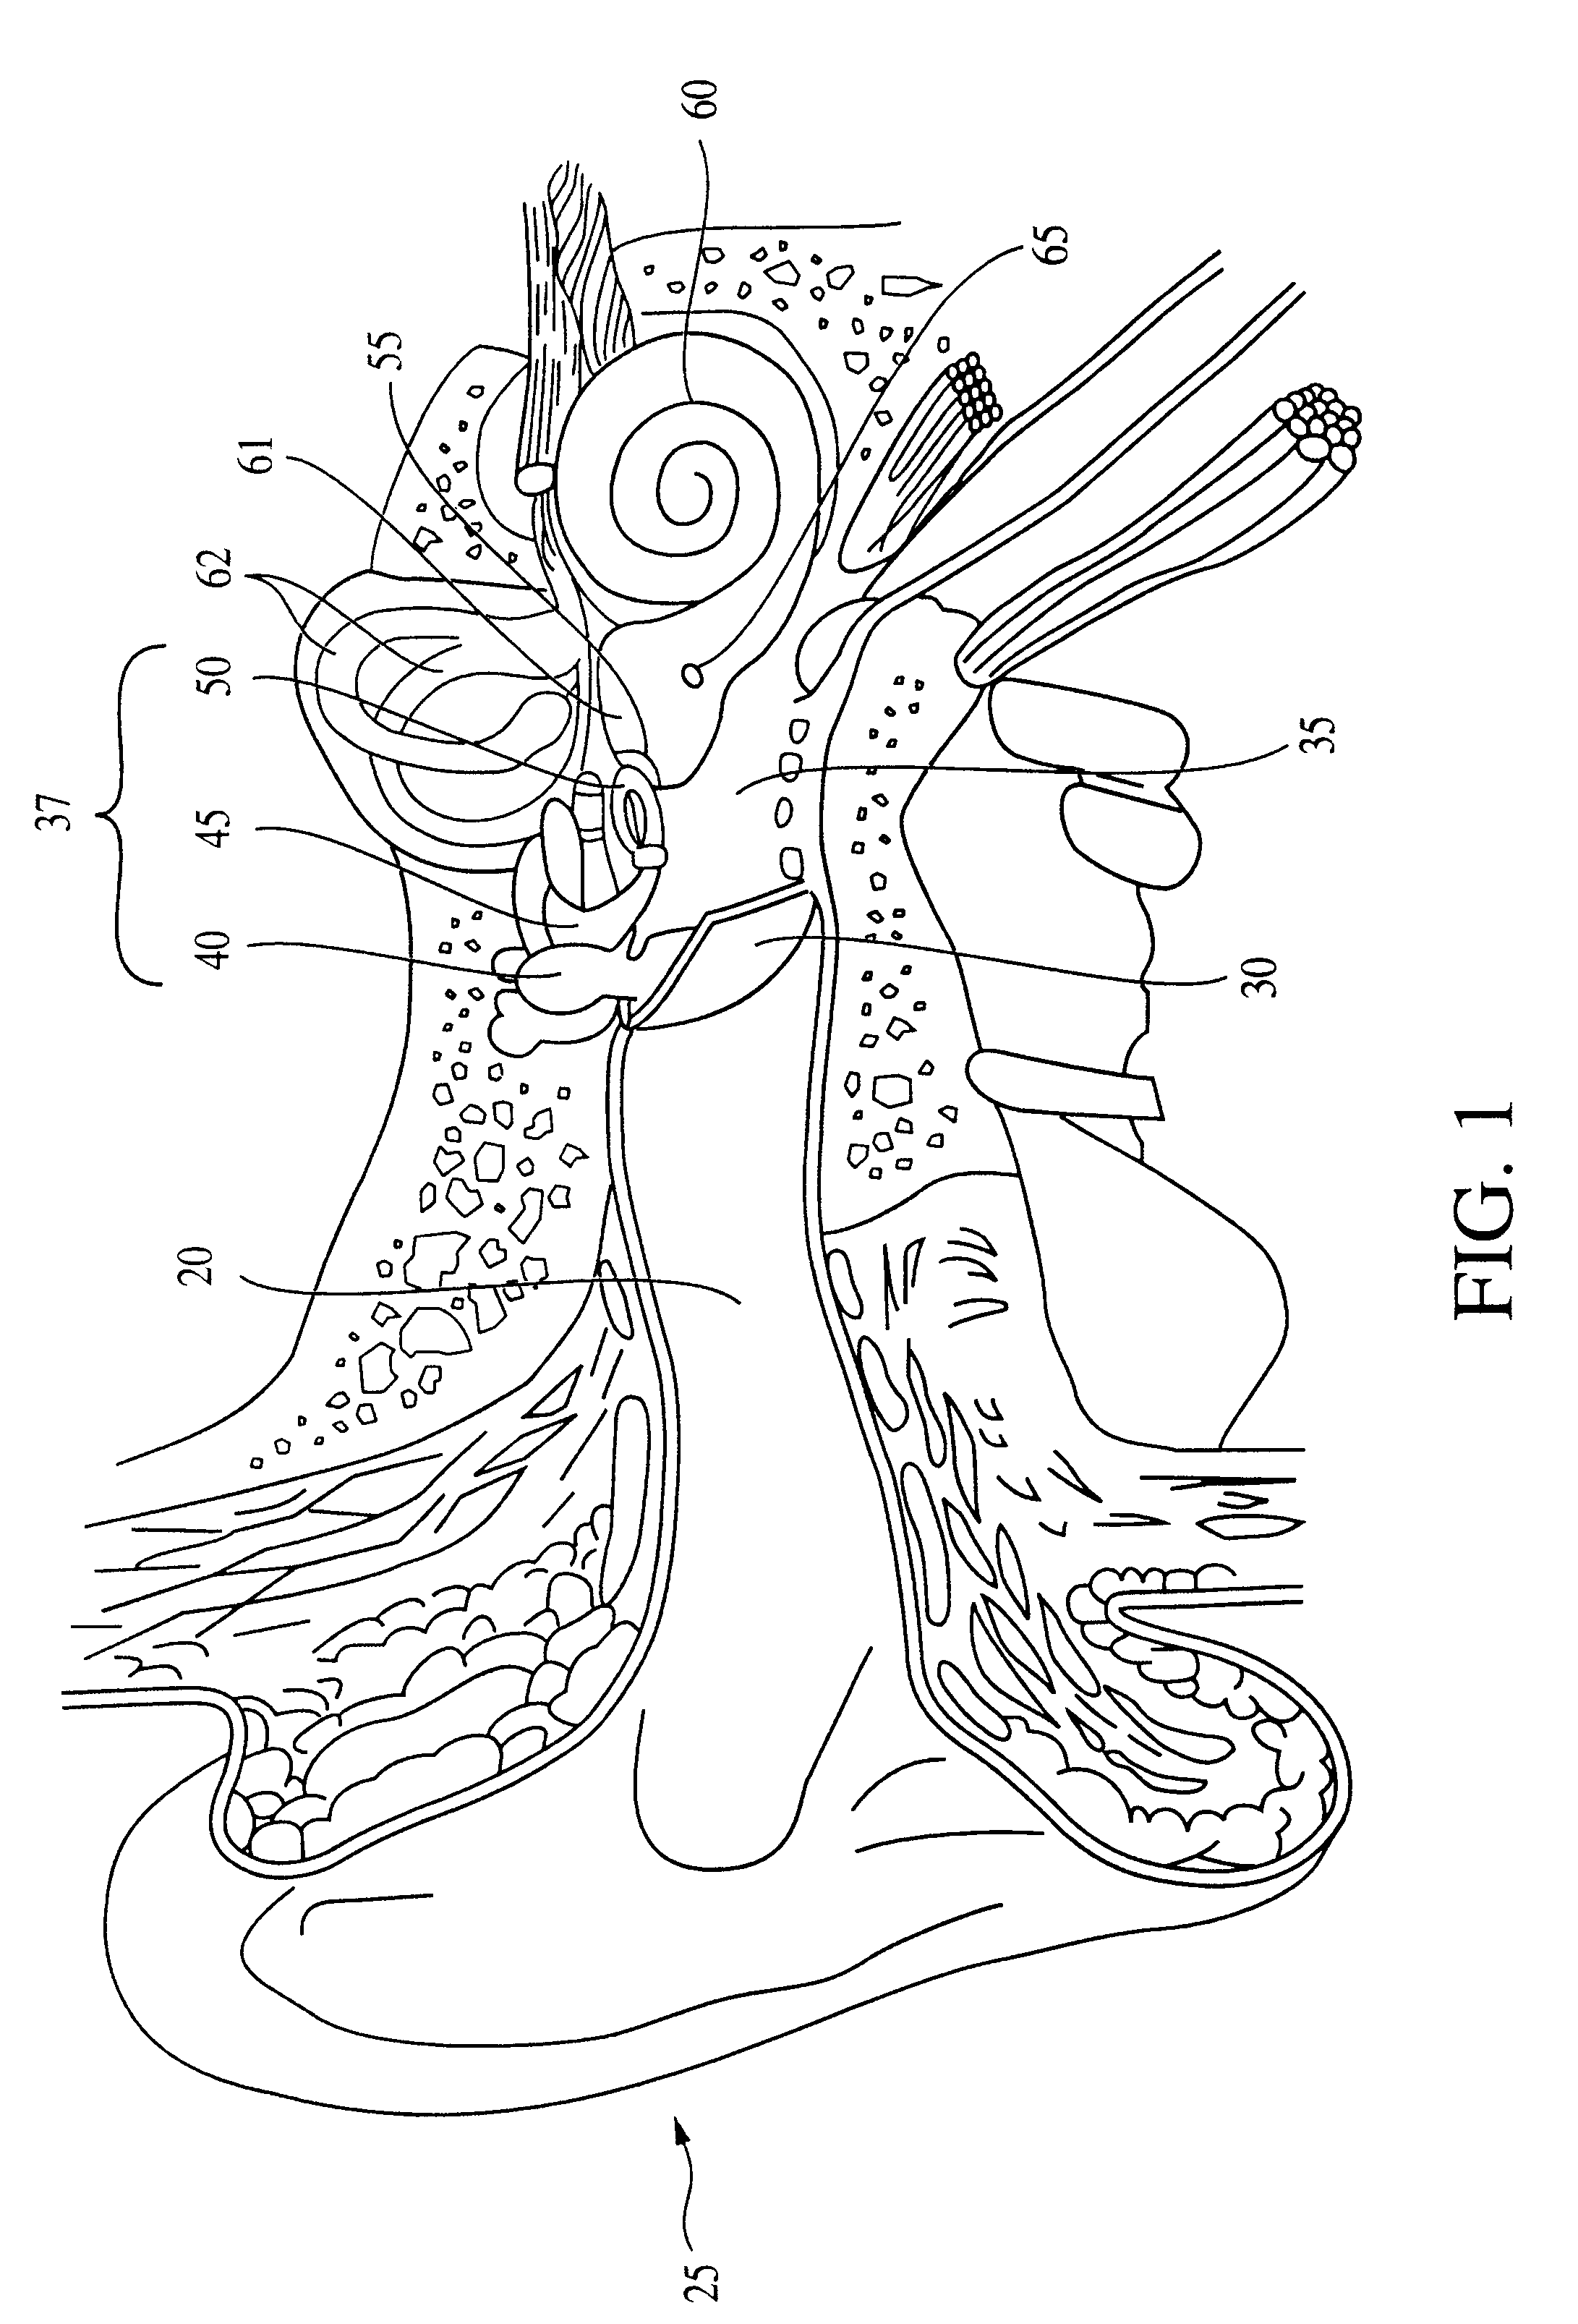 Method and apparatus for a programmable implantable hearing aid